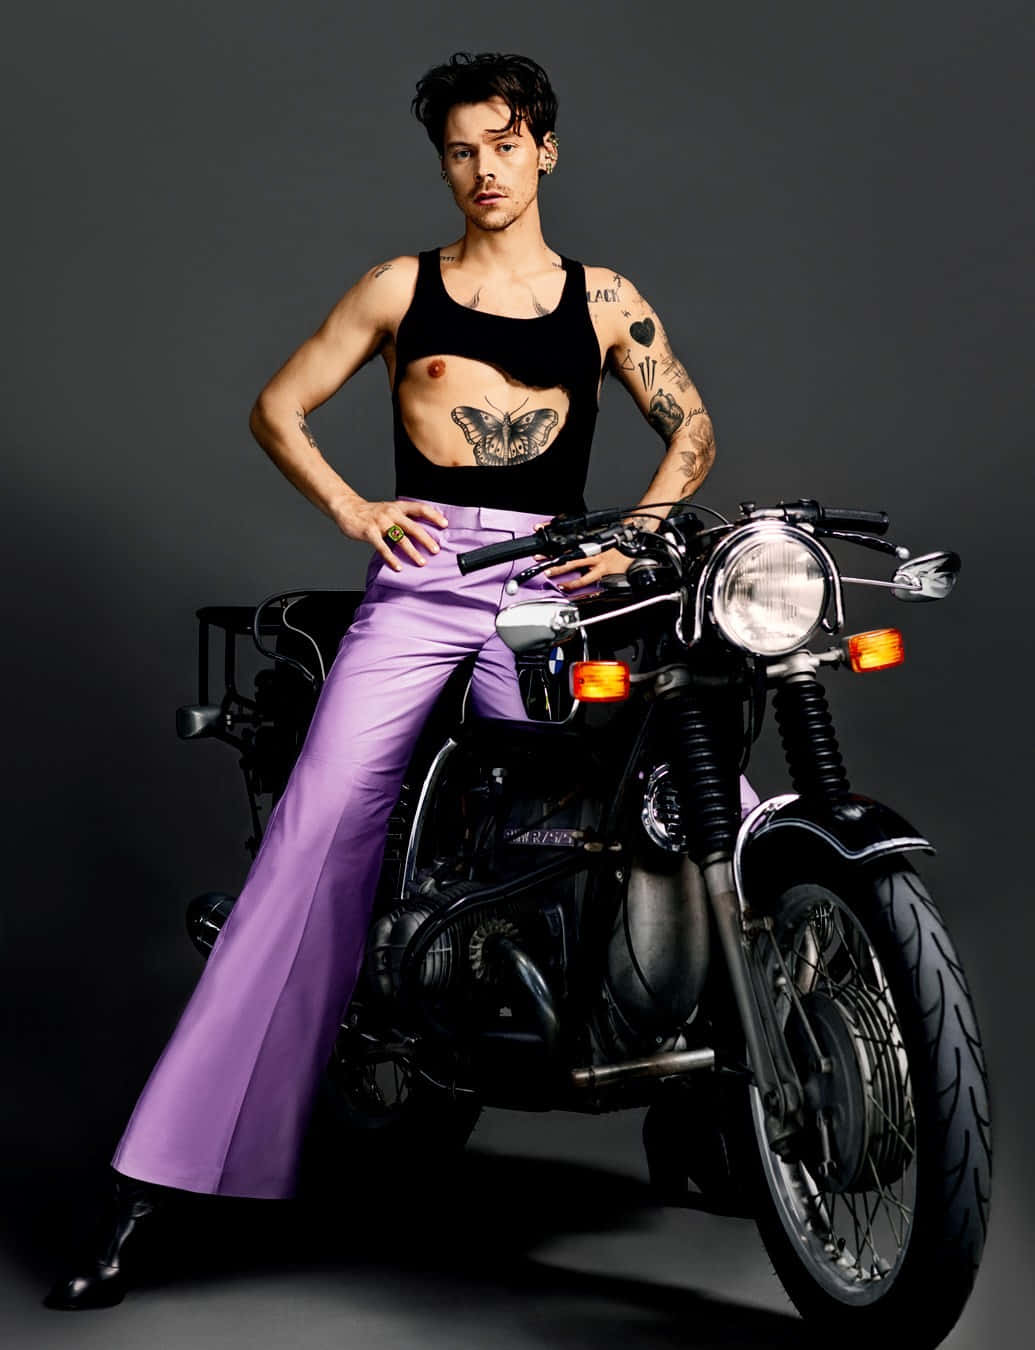 A Woman With Tattoos Posing On A Motorcycle